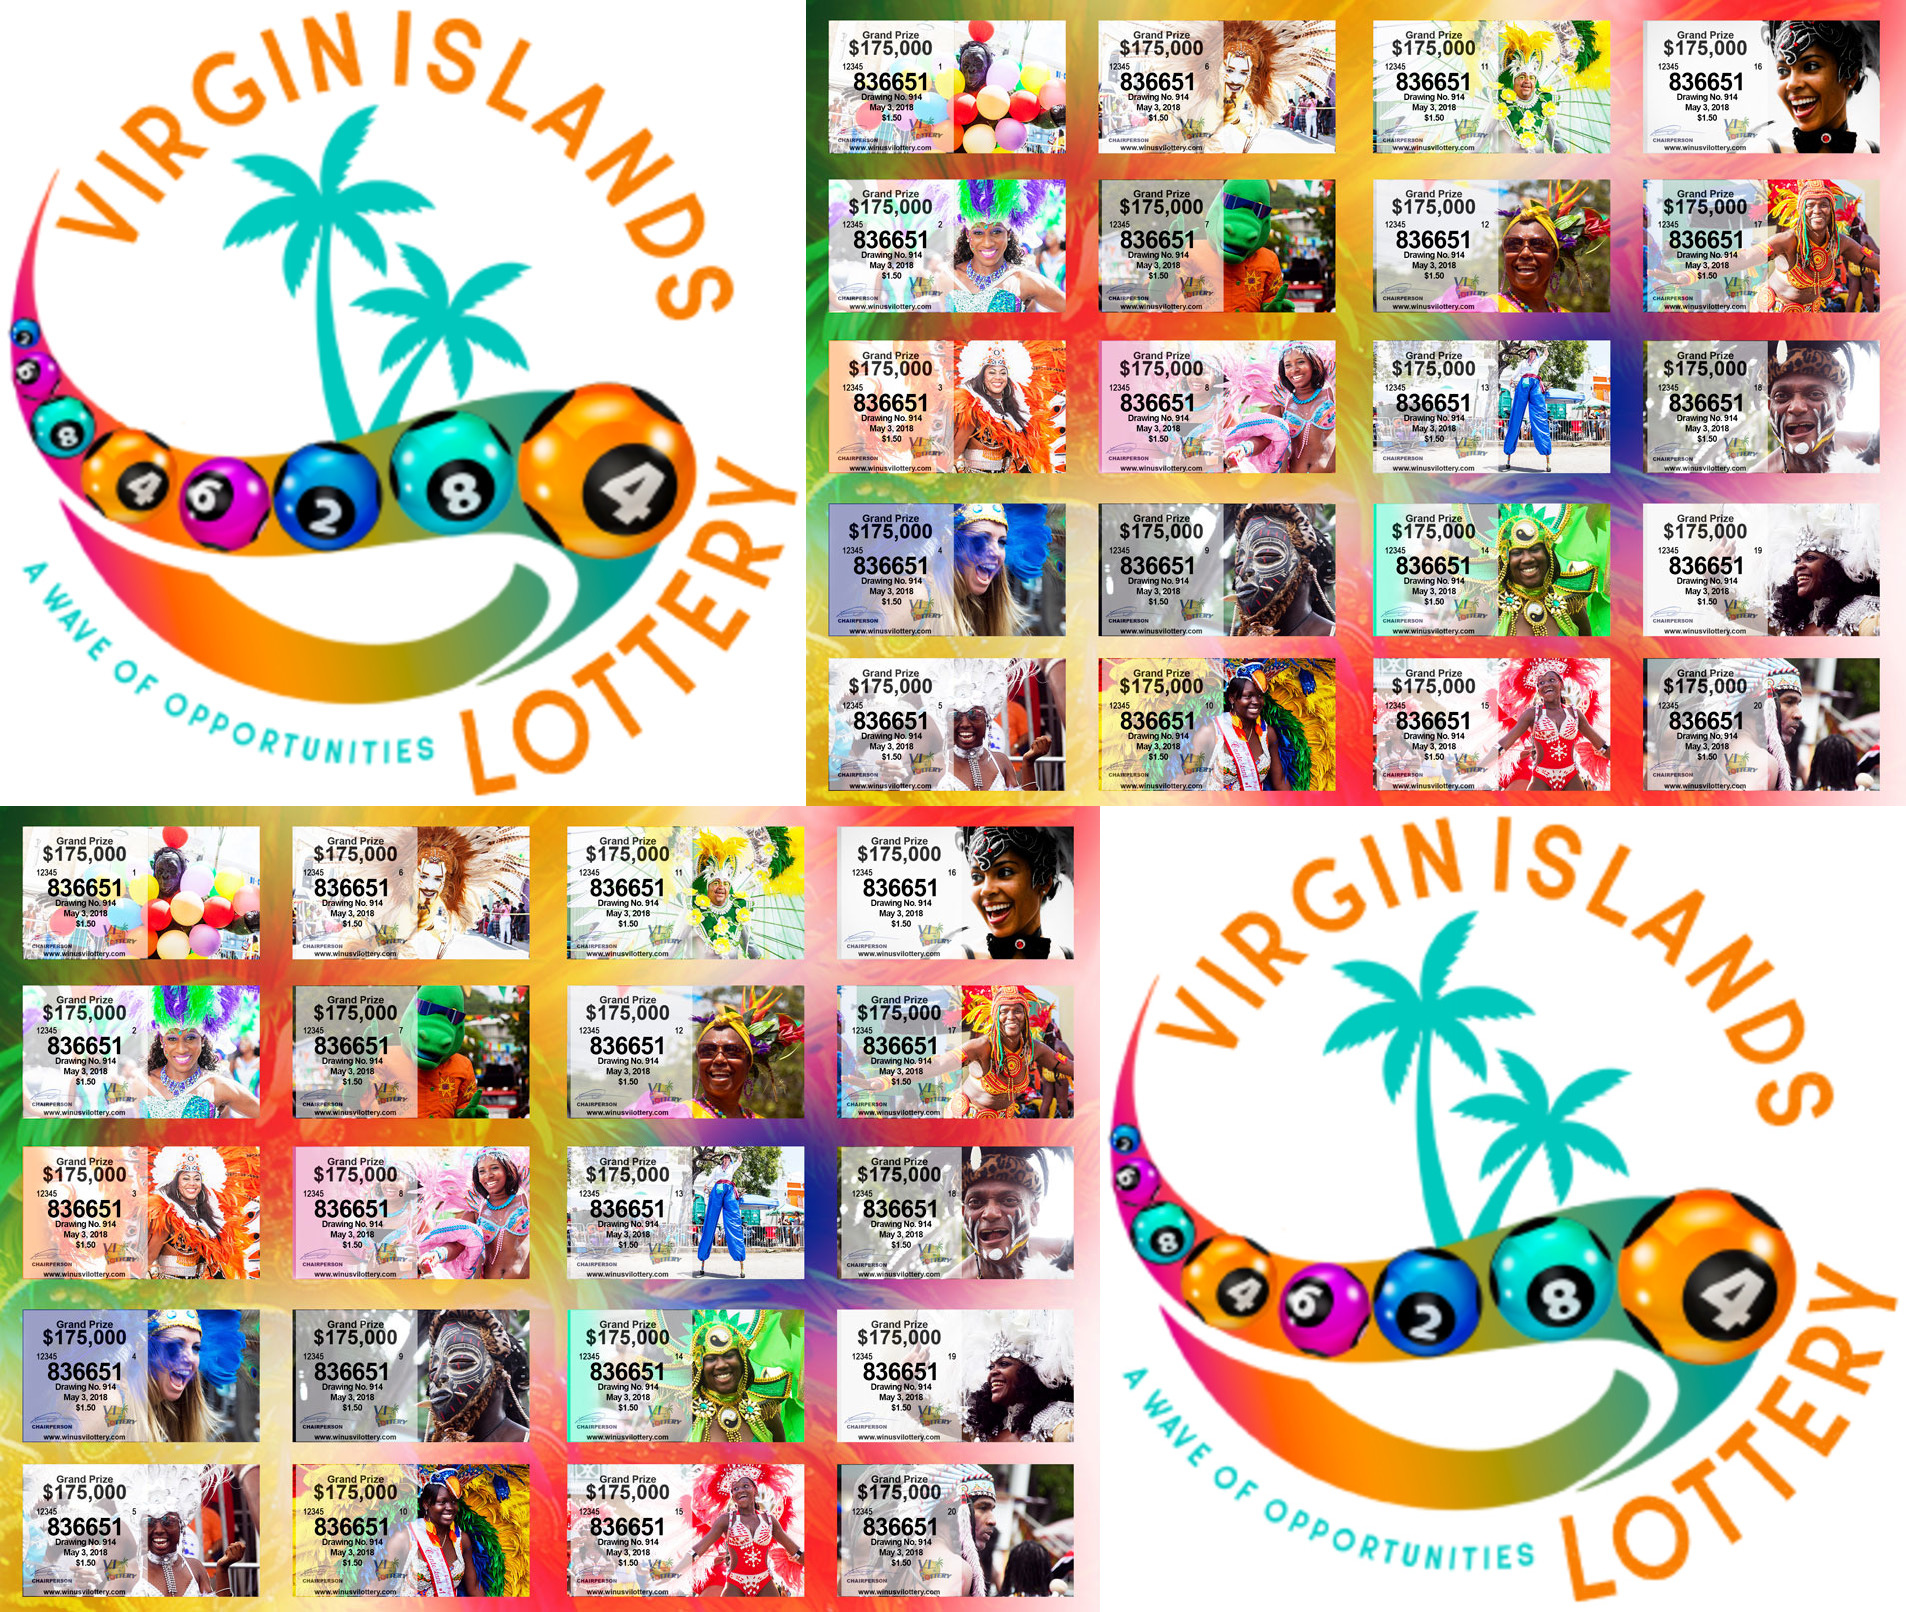 Virgin Islands Lottery Developing Online Ticket Sales, Executive Director Says